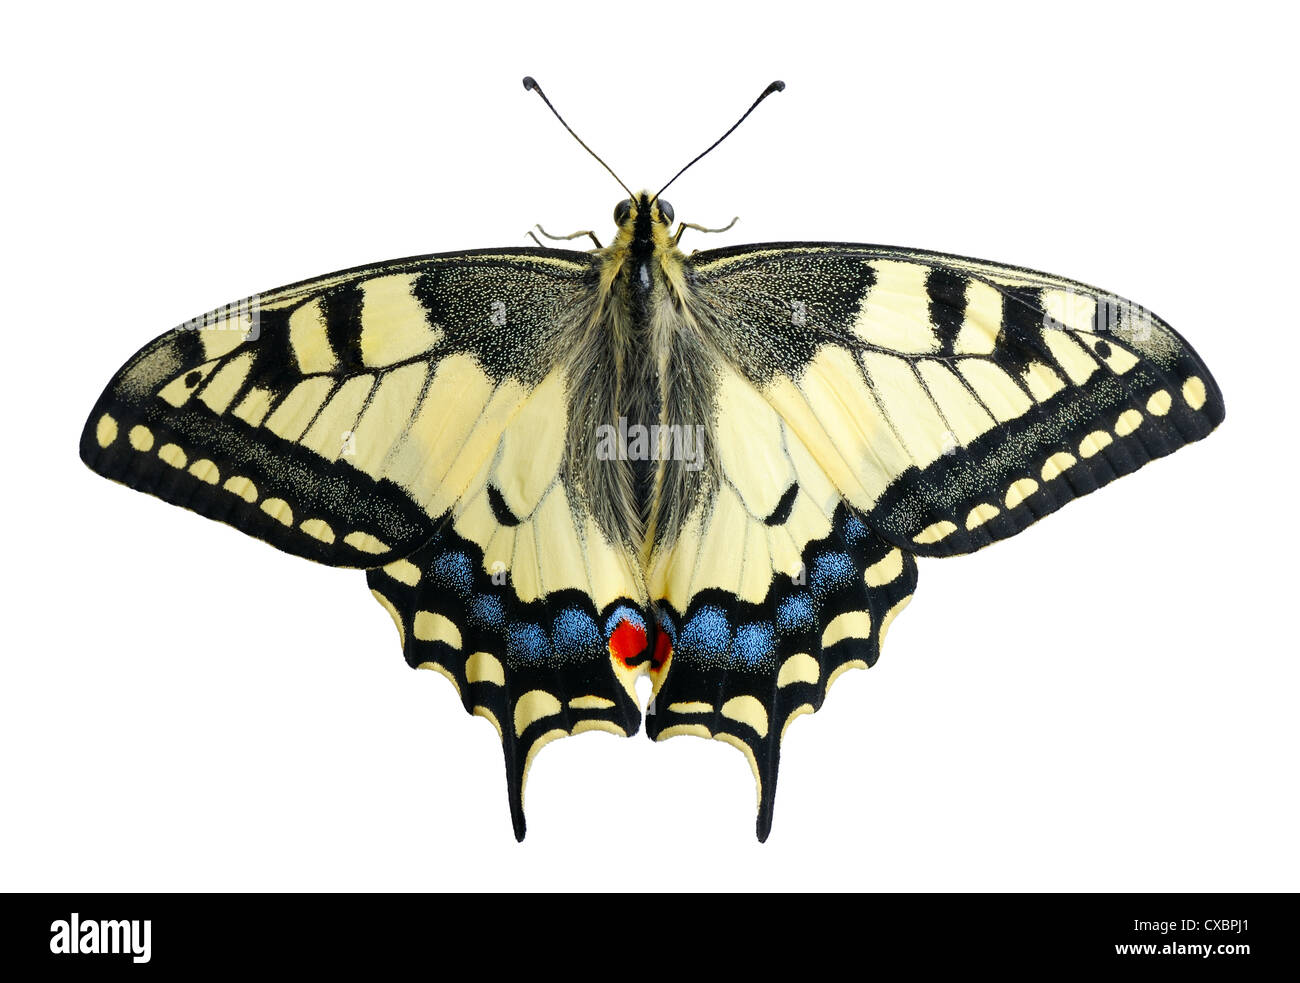 Swallowtail butterfly on a white background, isolated. Stock Photo